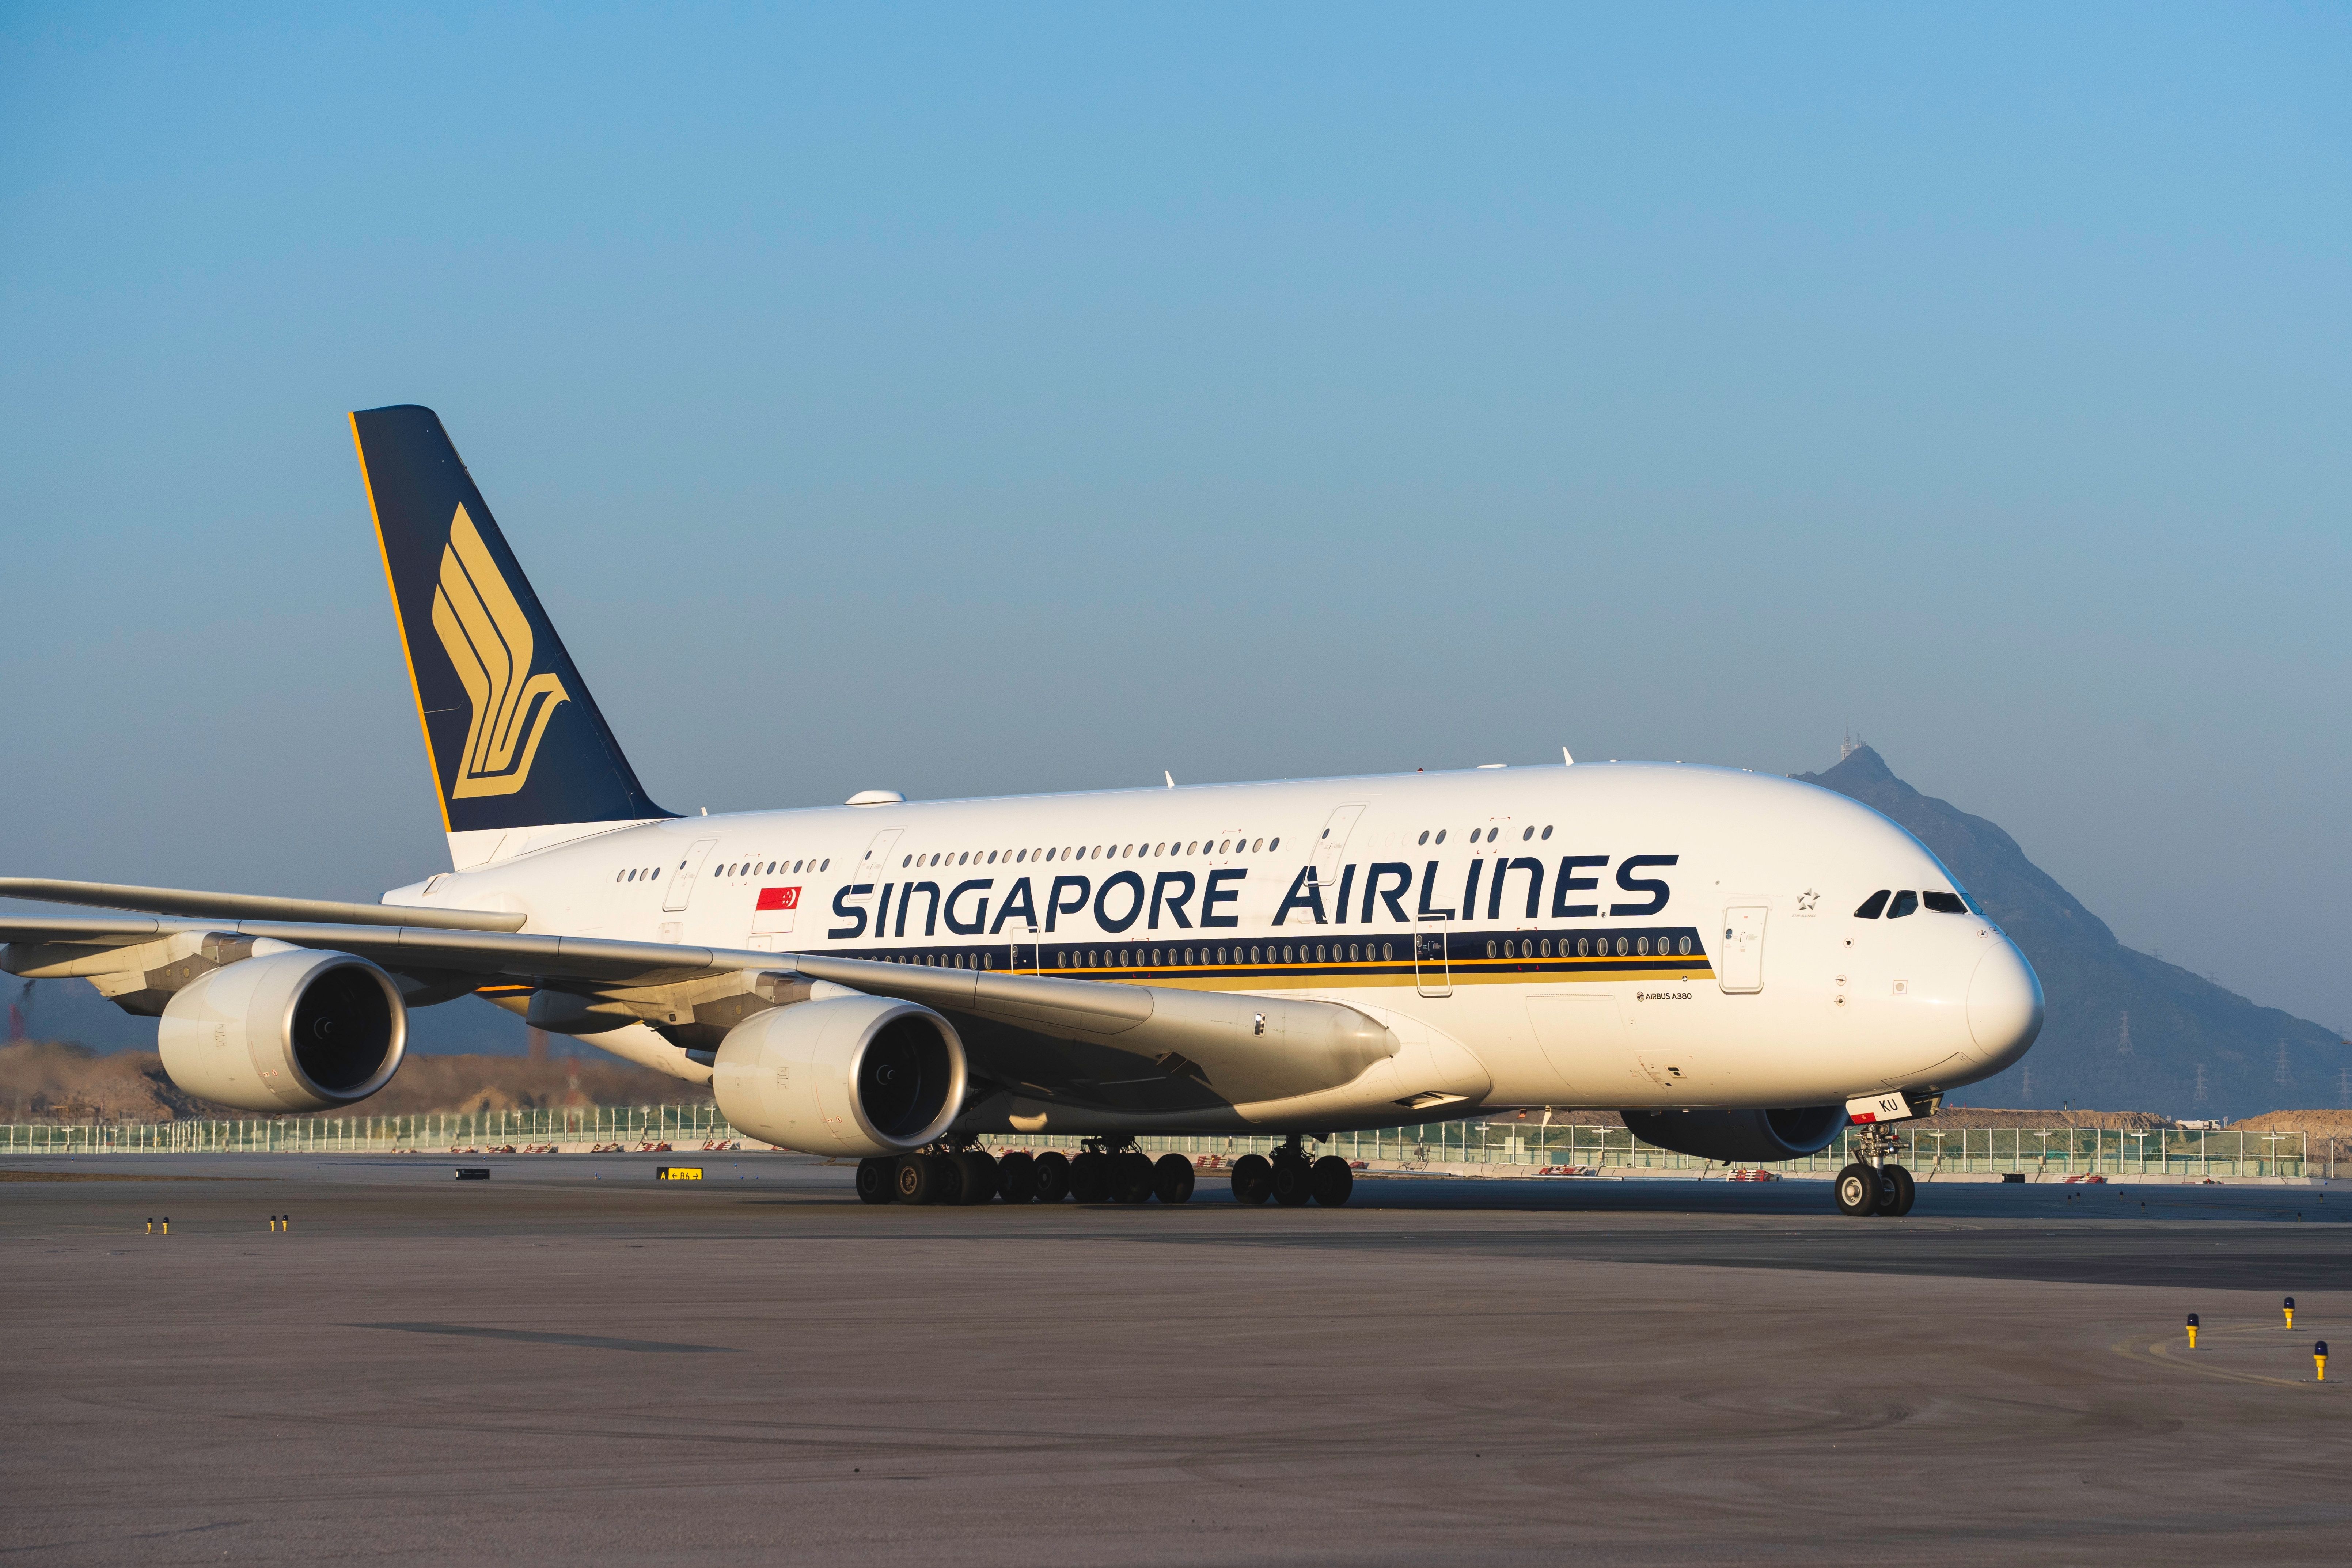 A Singapore Airlines Airbus A380 parked at an airport.